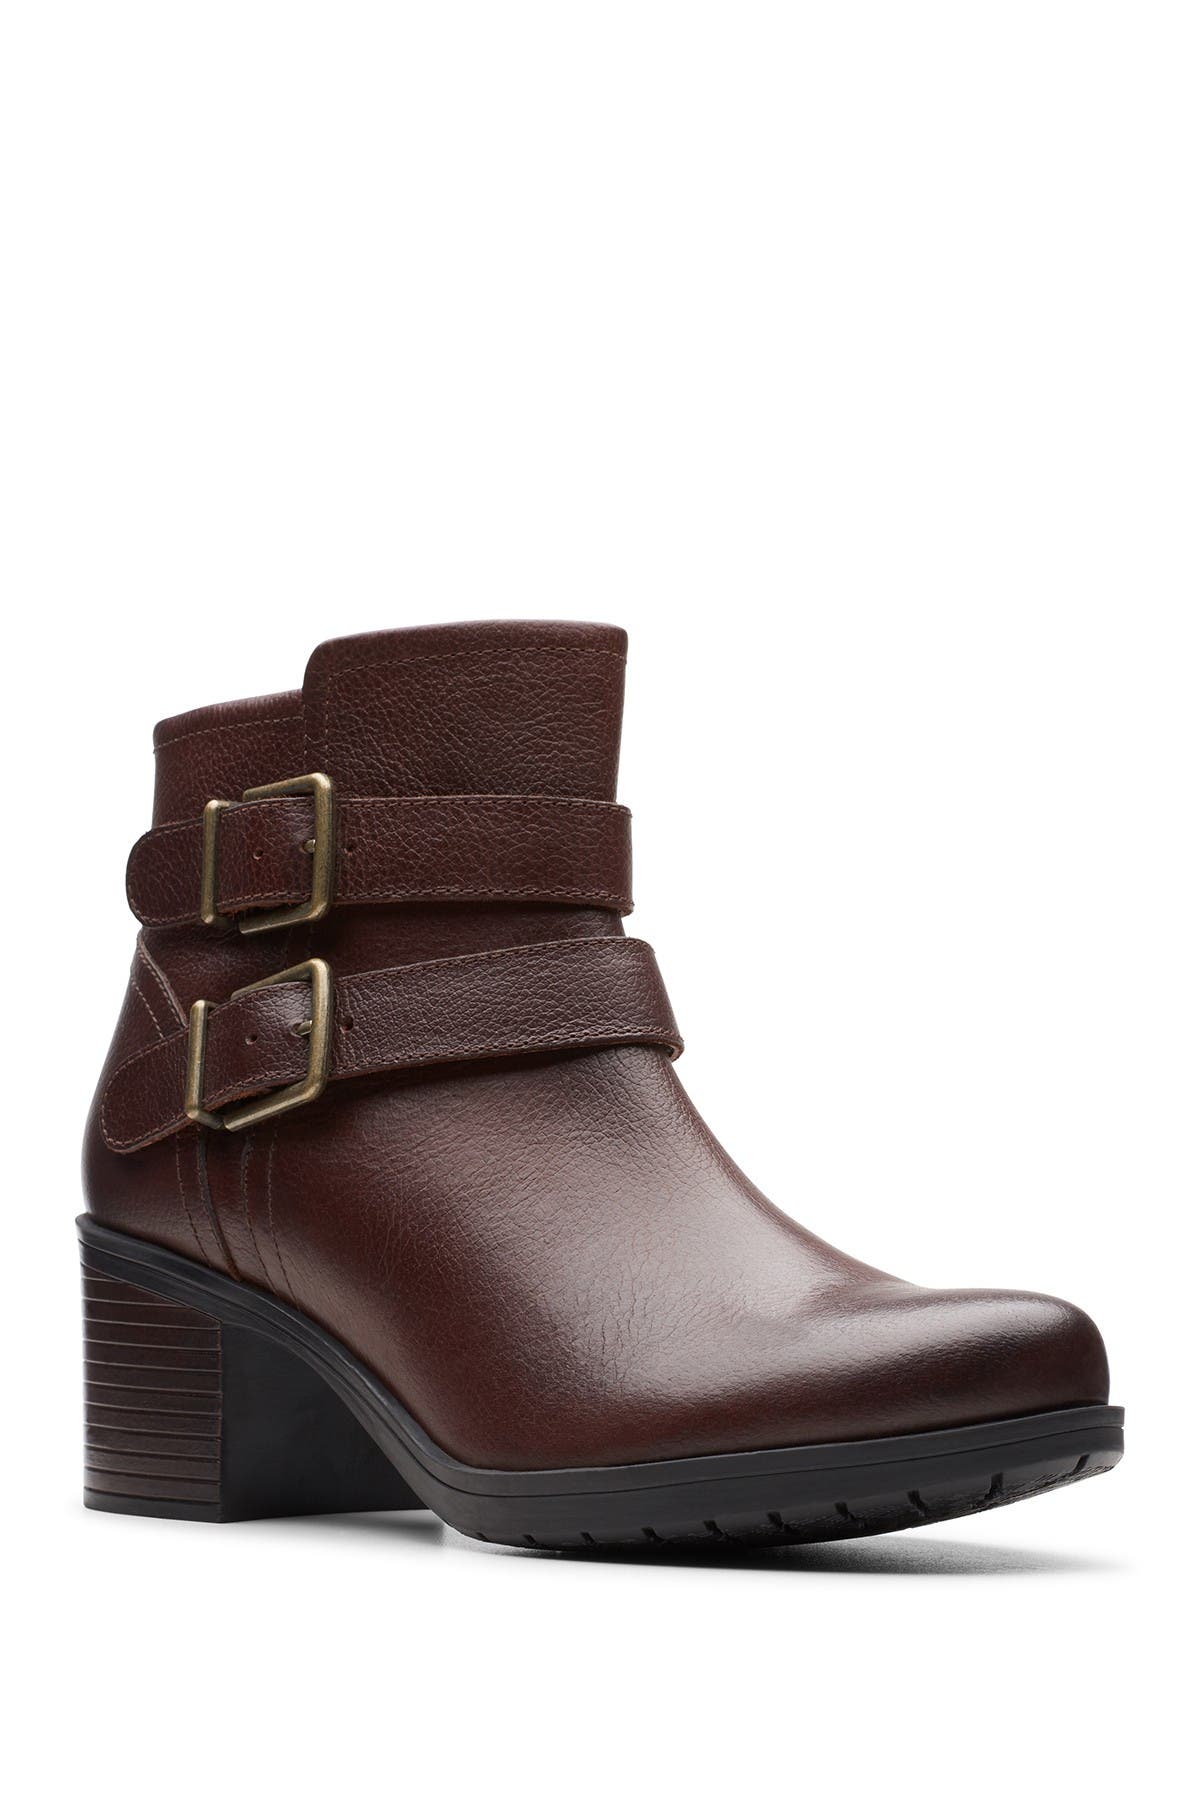 Clarks | Hollis Pearl Leather Boot 